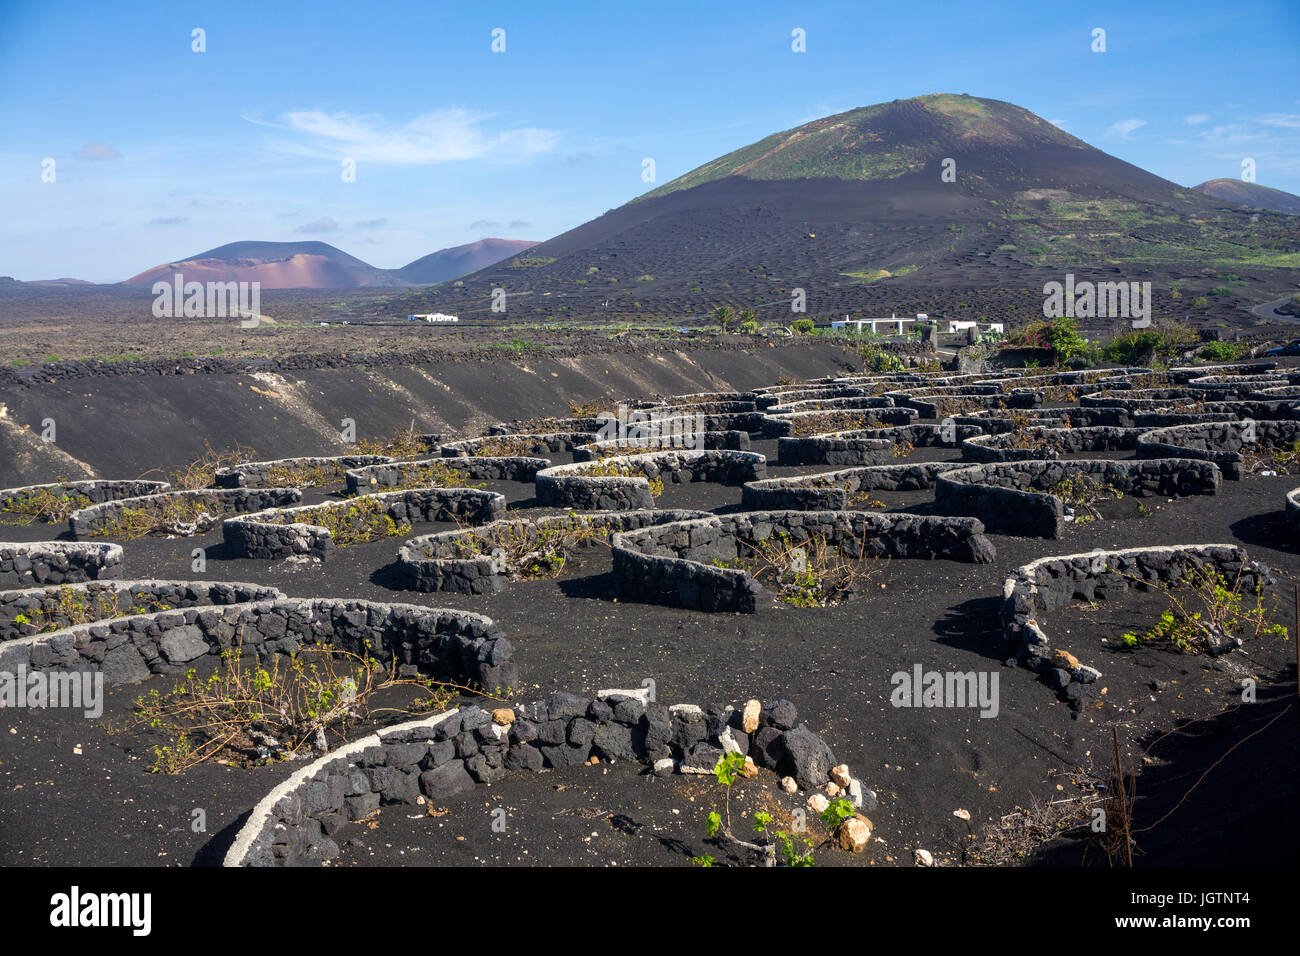 Volcanic wine growing, lava stone murals and hollows protecting vines, vineyard at La Geria, Lanzarote island, Canary islands, Spain, Europe Stock Photo